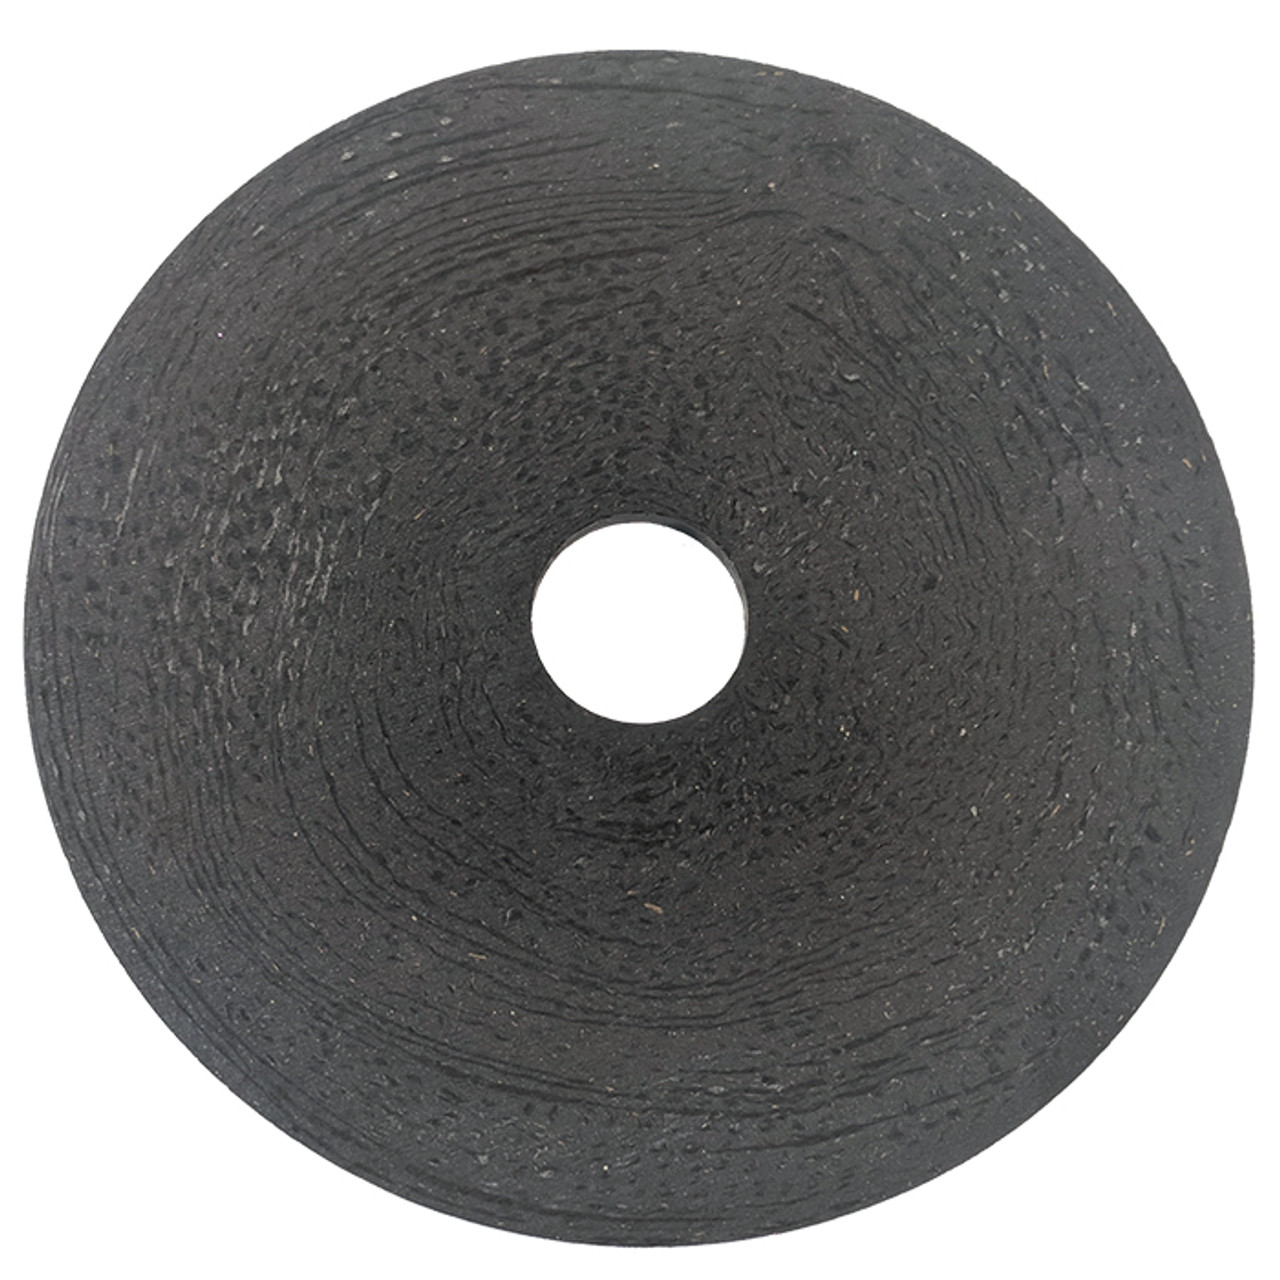 FRICTION DISC 6.5" X 1.125"